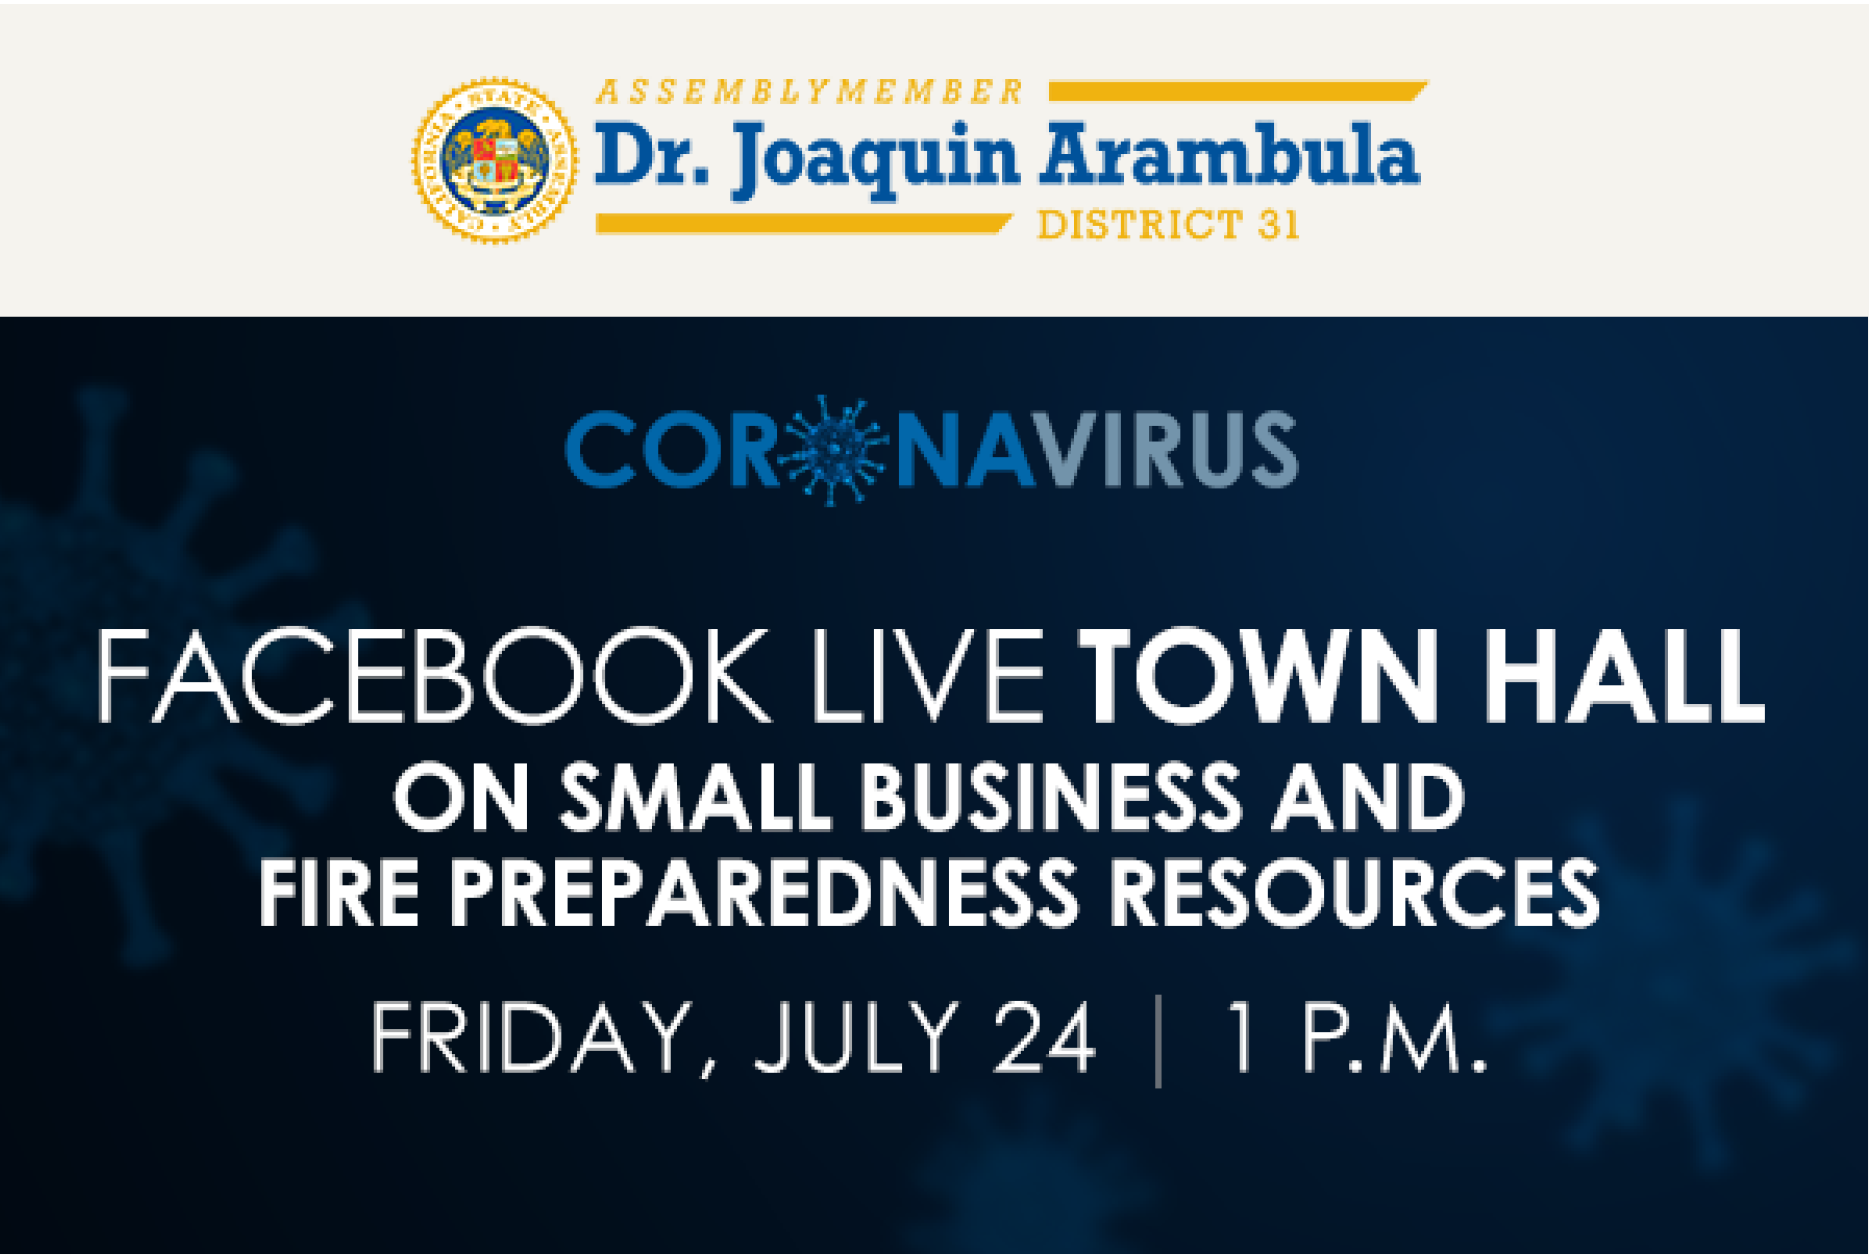 CORONAVIRUS  FACEBOOK LIVE TOWN HALL ON SMALL BUSINESS AND FIRE PREPAREDNESS RESOURCES FRIDAY, JULY 24, 1PM